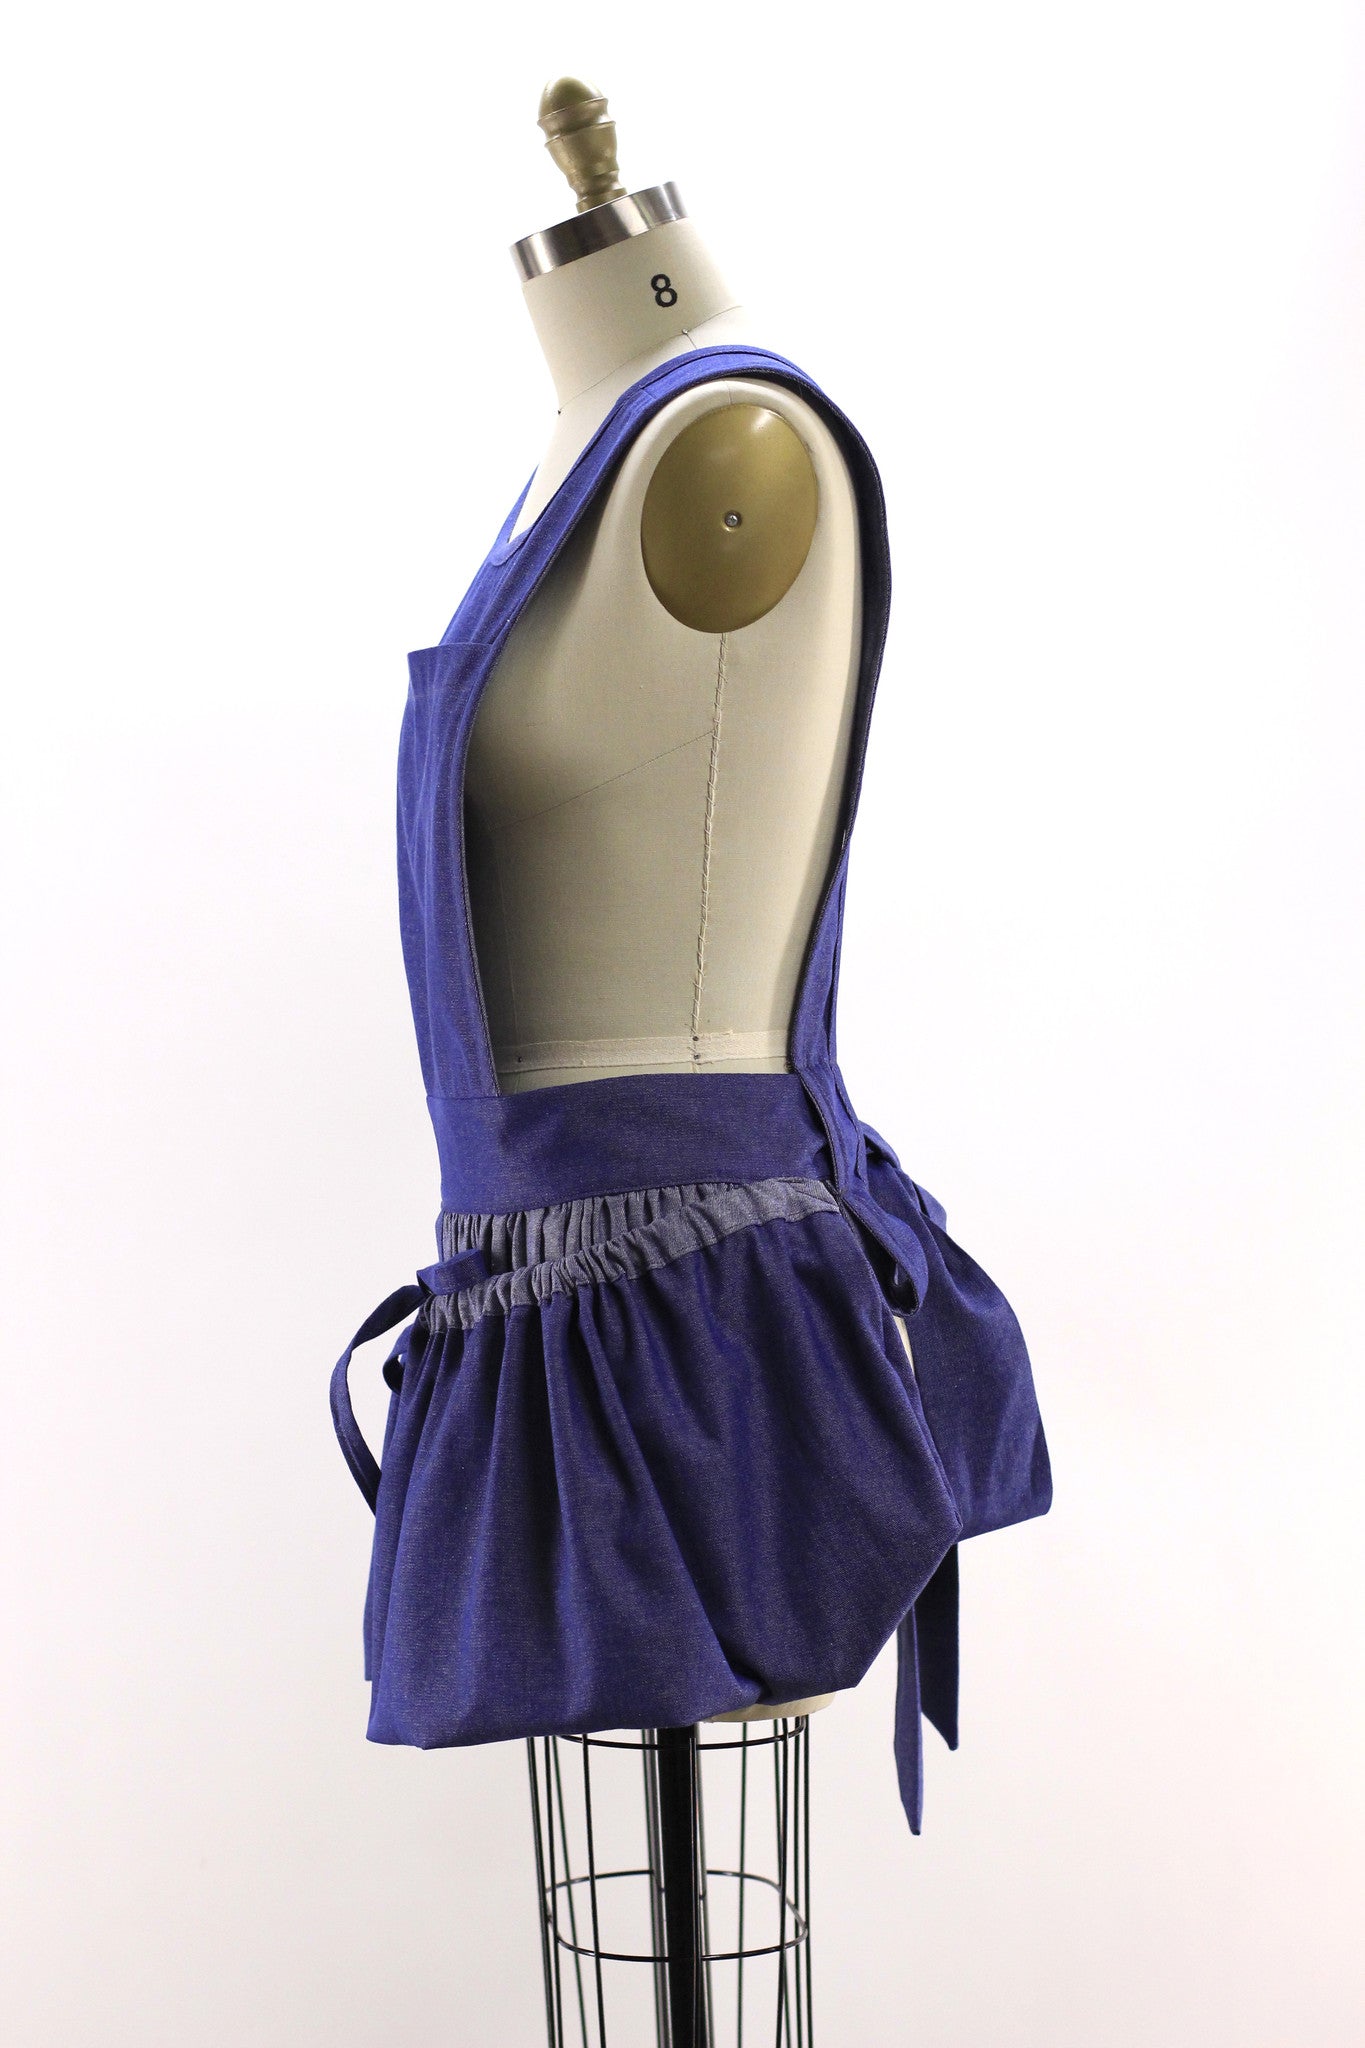 Gathering Apron with Bib Top in Denim, side view